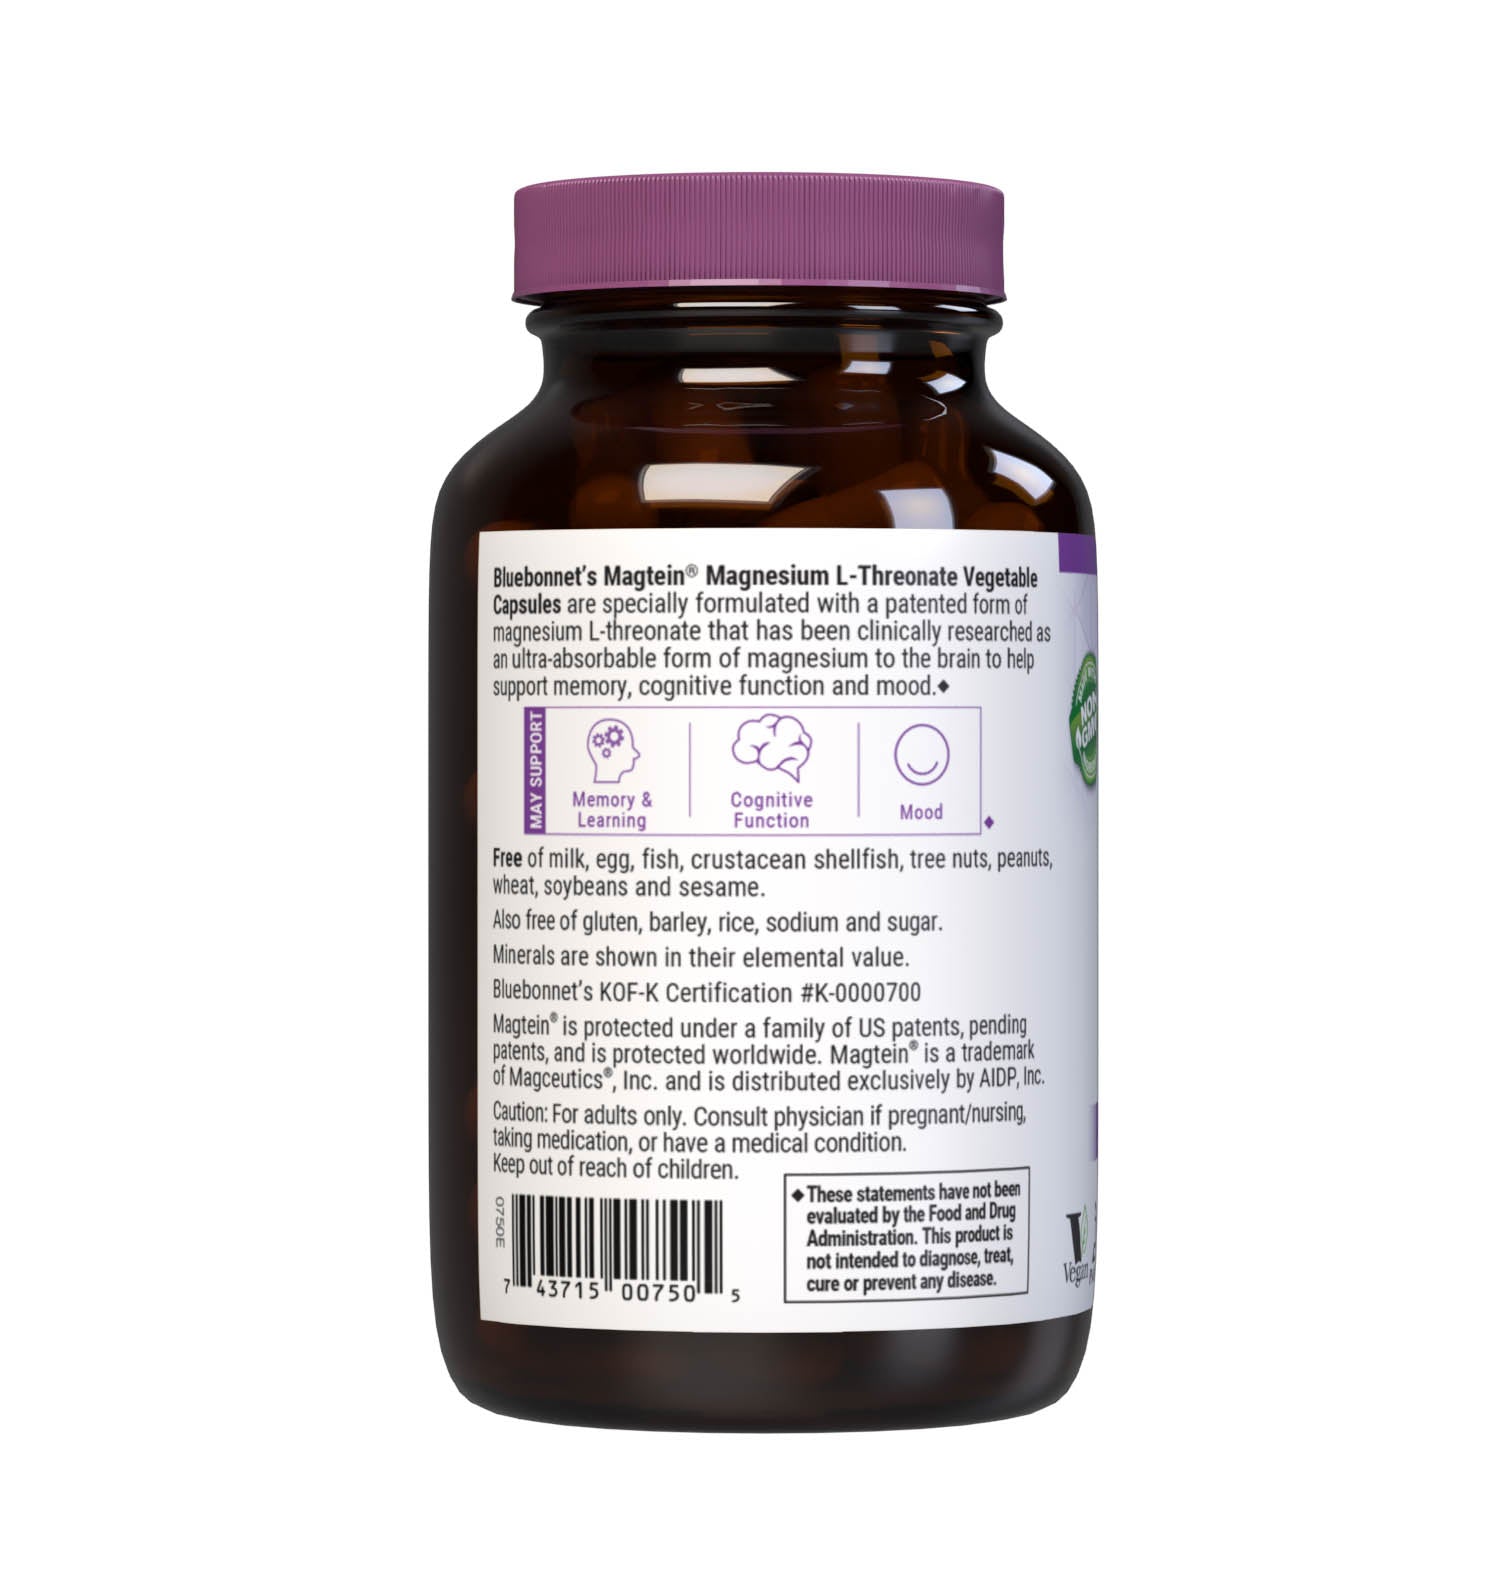 Bluebonnet’s Magnesium L-Threonate 90 Vegetable Capsules are specially formulated with a patented form of magnesium L-threonate, Magtein, which has been clinically researched as an ultra-absorbable form of magnesium to the brain. Description panel. #size_90 count